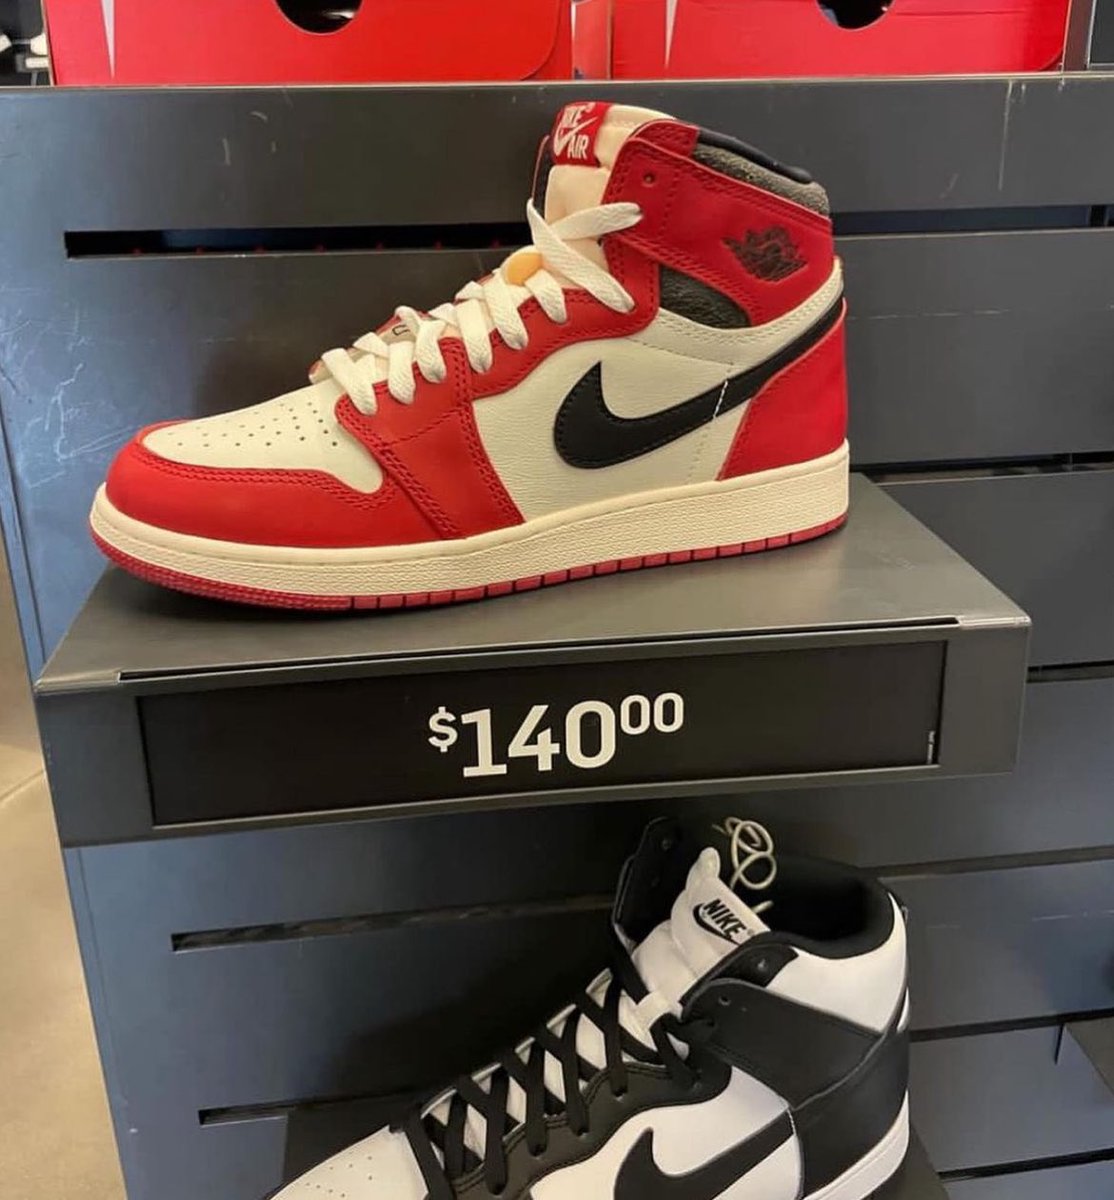 🚨Une Jordan 1 High ‘Lost and Found’ GS trouvée en outlet Nike ! 😵‍💫

📍: Long Island, New York